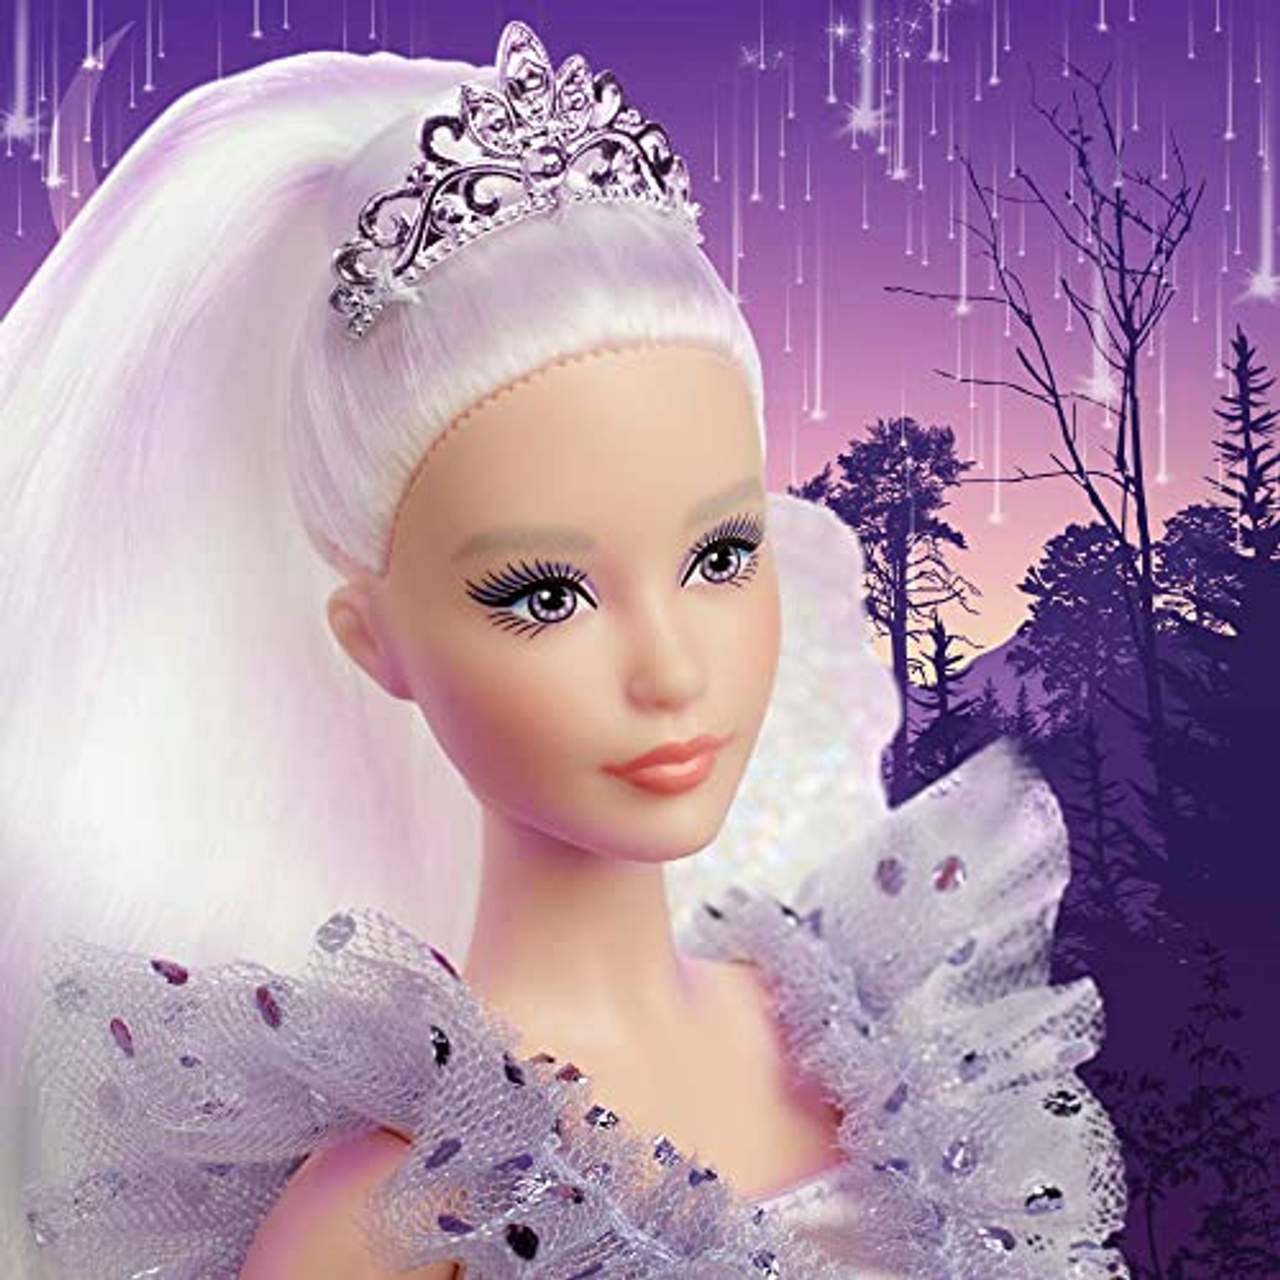 Barbie HBY16 Signature Zahnfee-Puppe